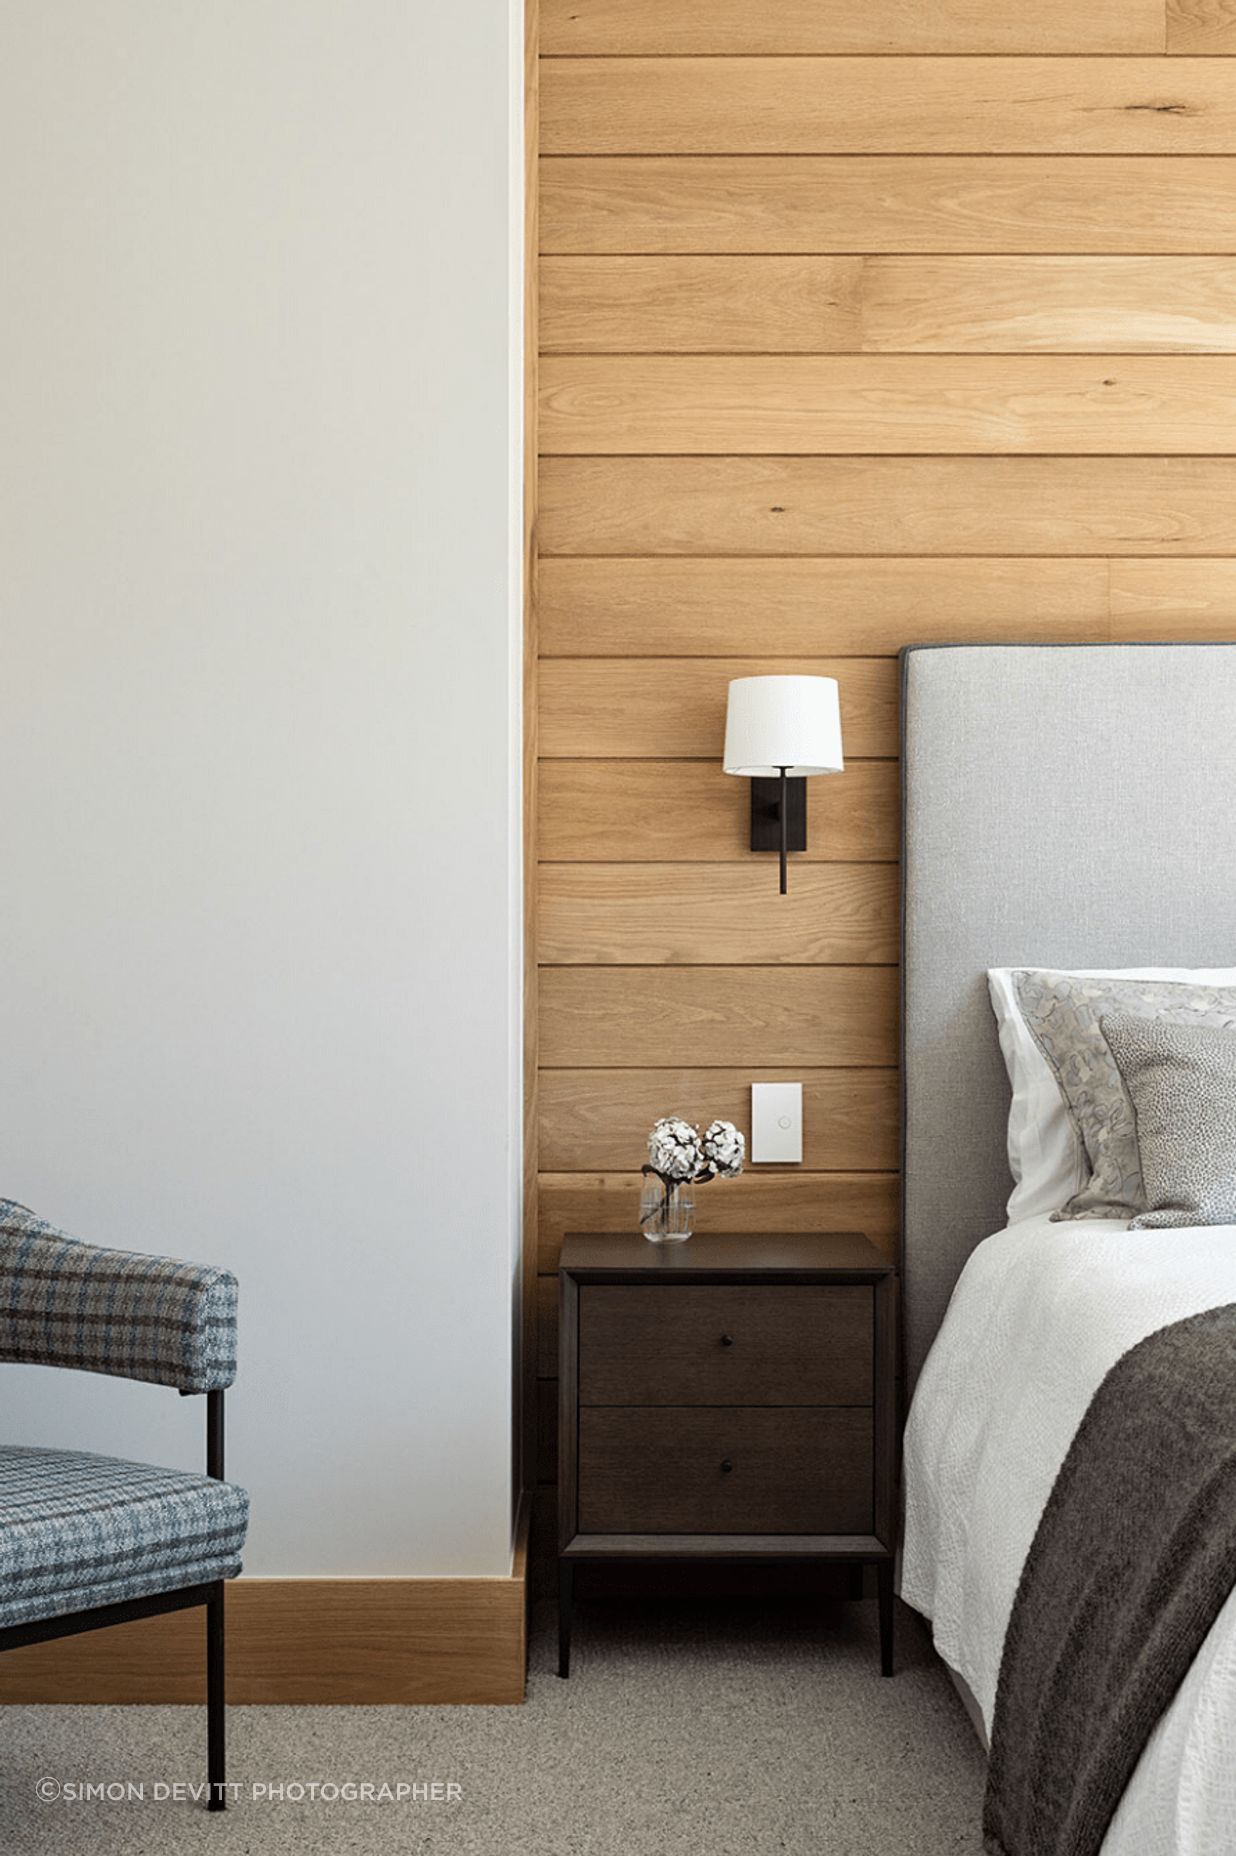 Oak timber lining in some of the guest rooms ties the material palette back to the land.